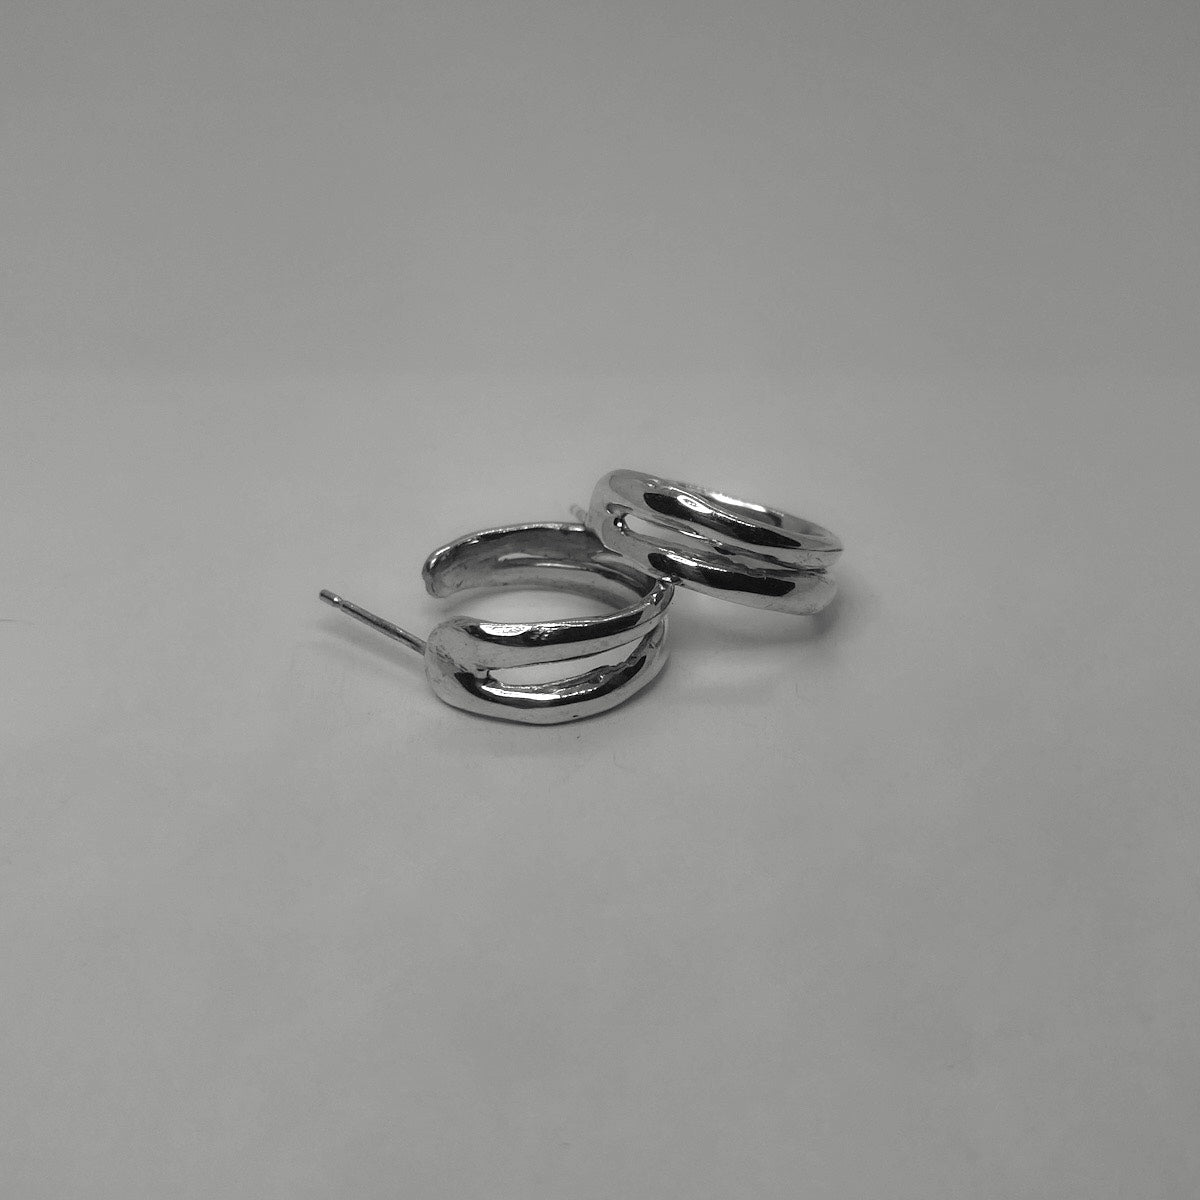 Handmade double hoop earrings crafted from sterling silver 925